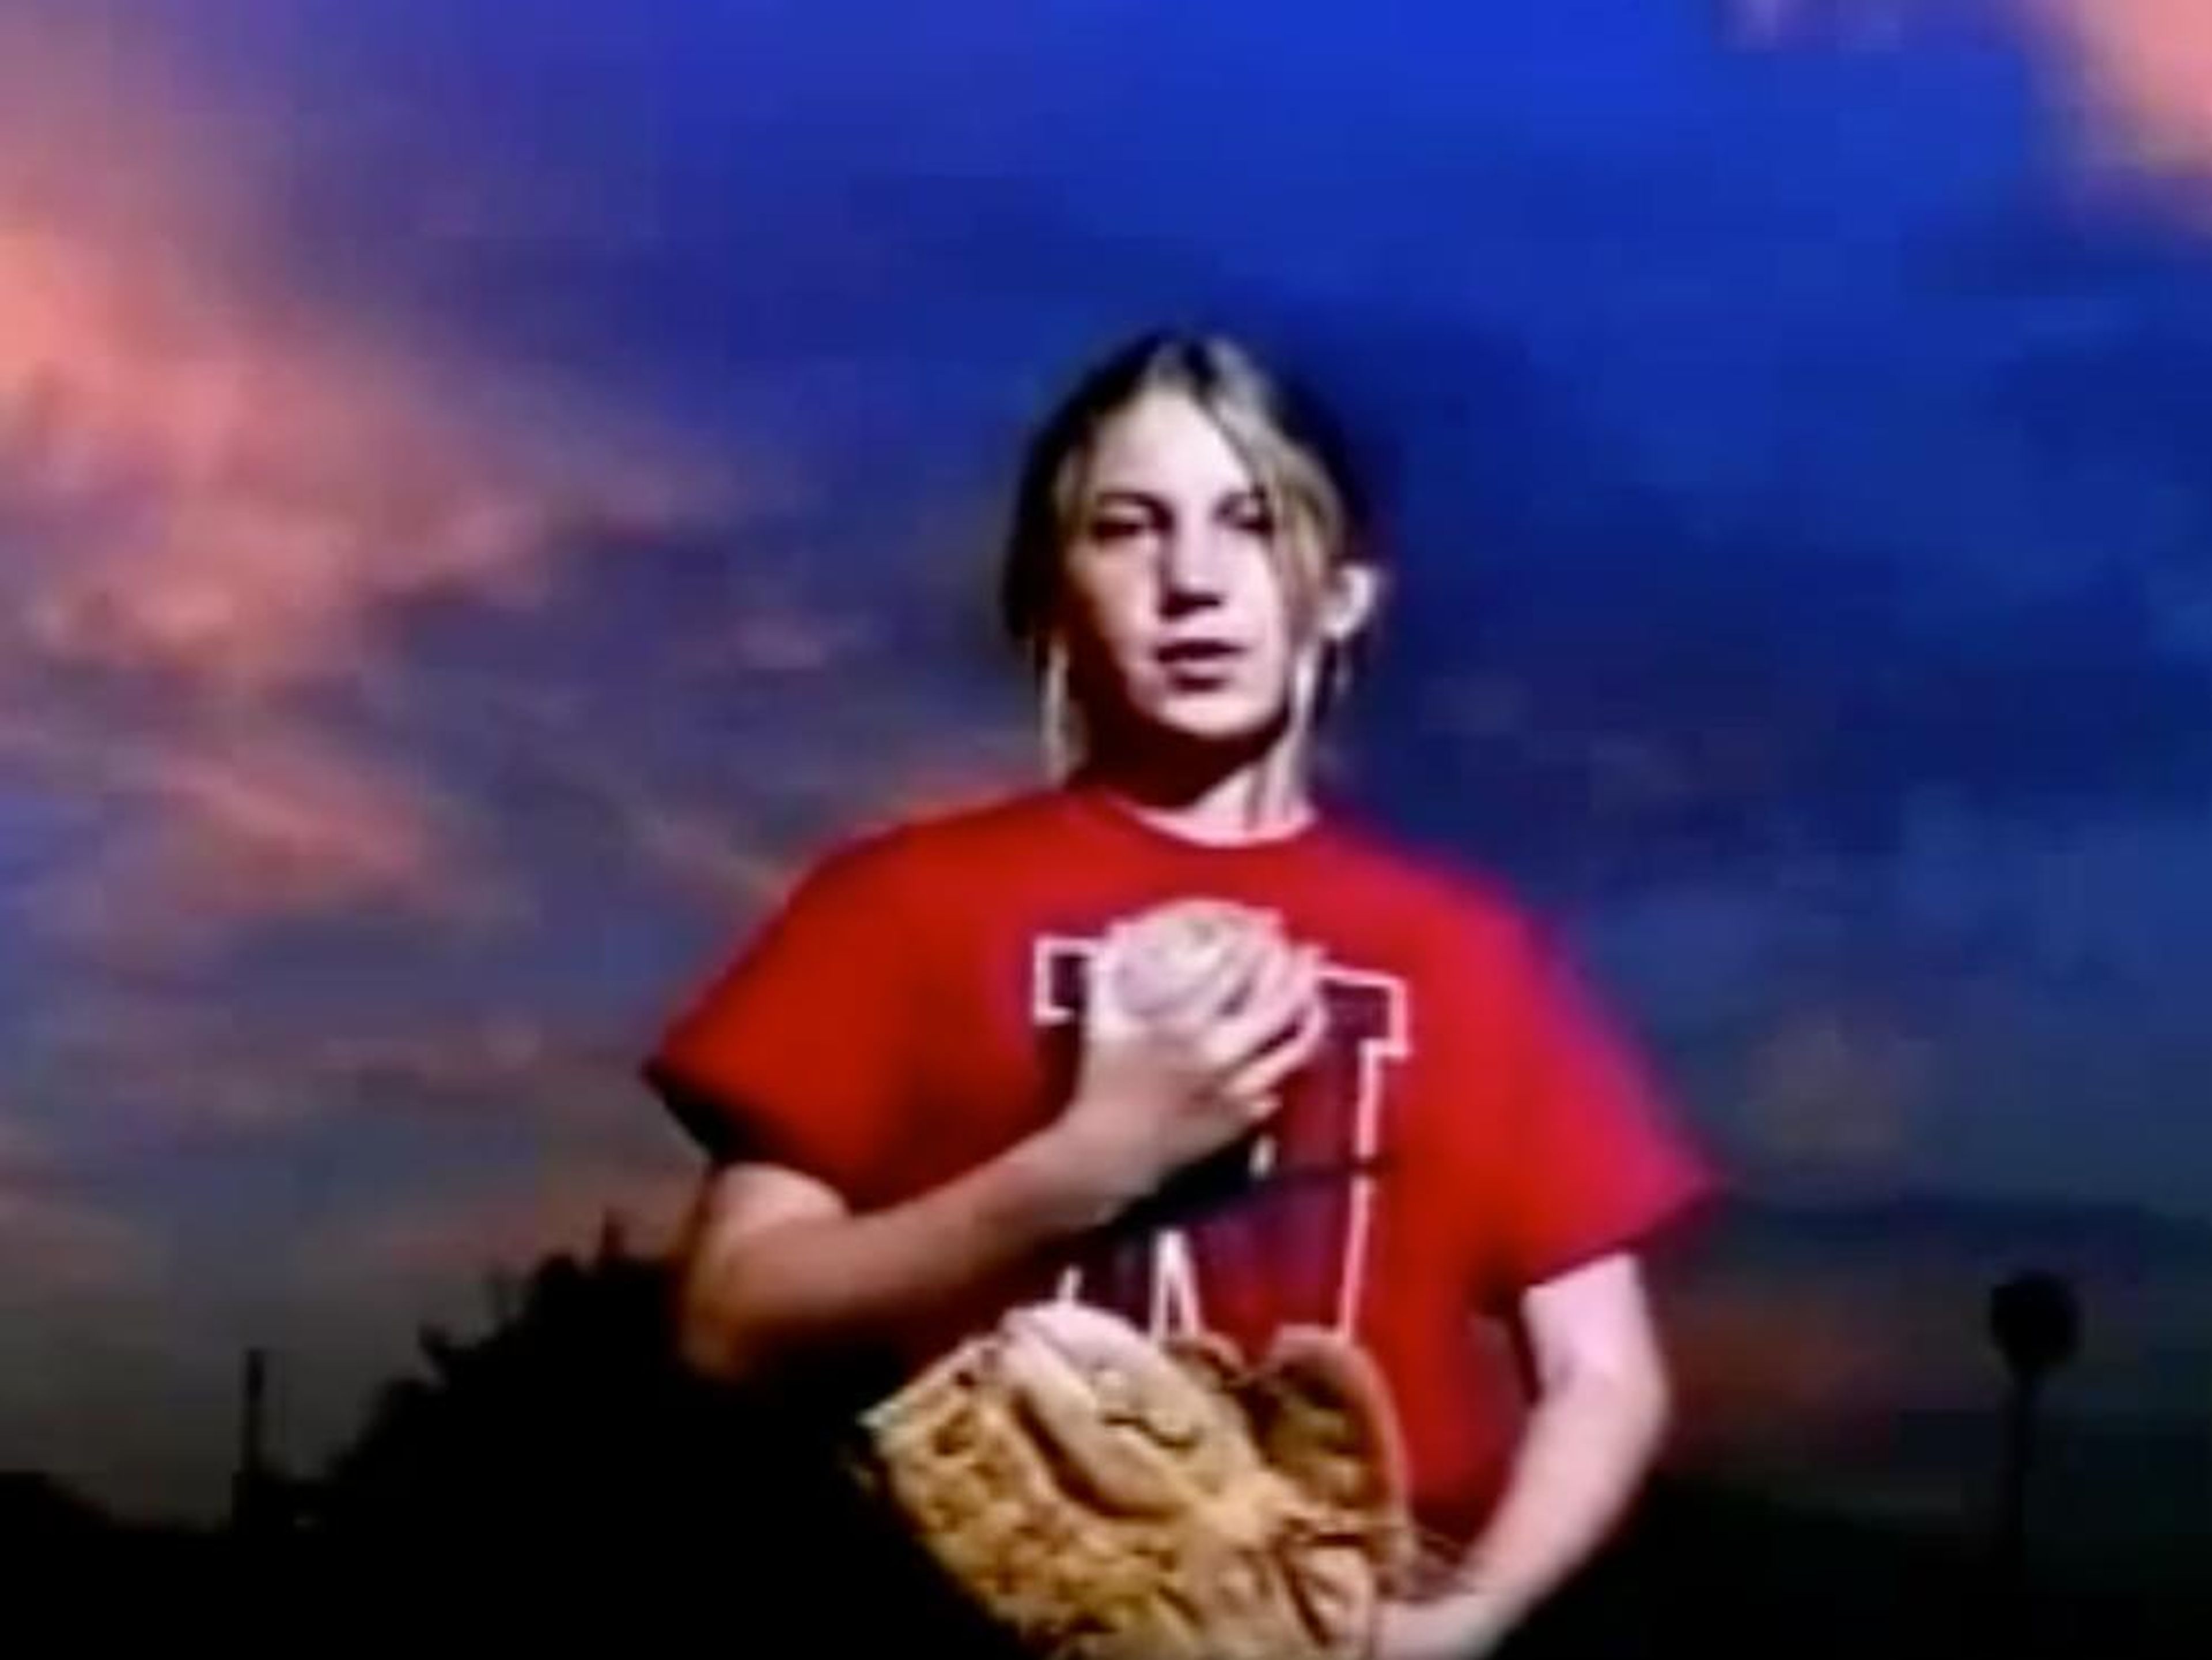 In 1995, Nike tackled gender issues with its "If You Let Me Play" ad, which addressed the benefits of organized sports for girls. The ad featured young girls quoting statistics about the benefits of how sports can improve their